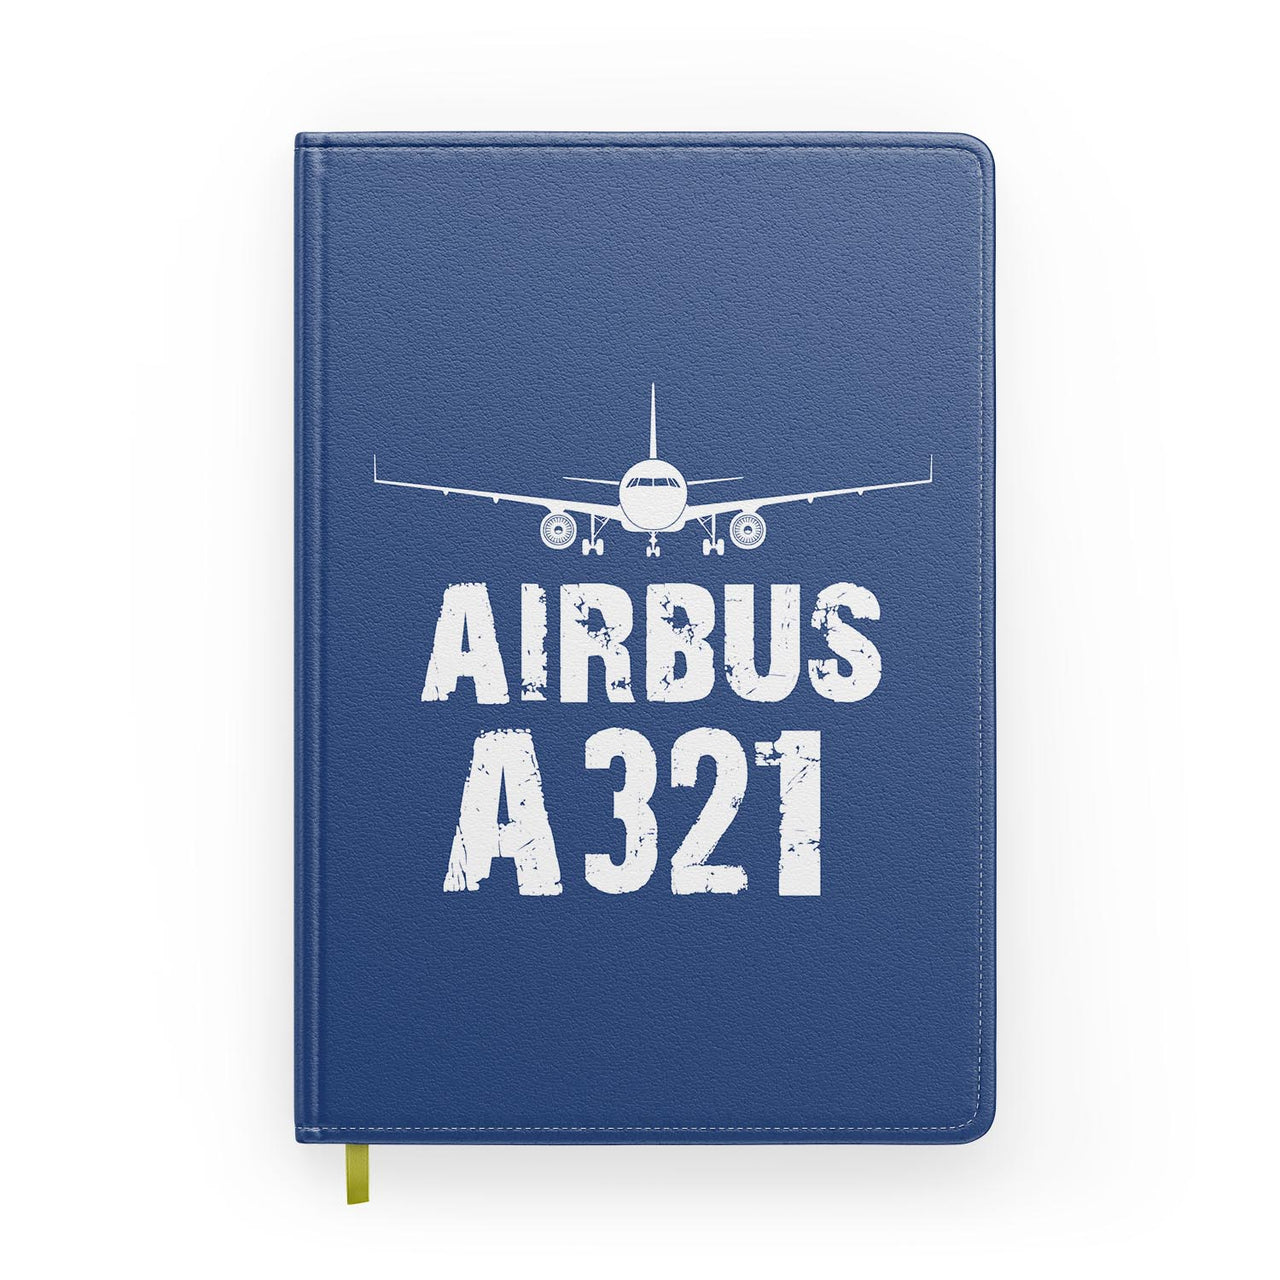 Airbus A321 & Plane Designed Notebooks